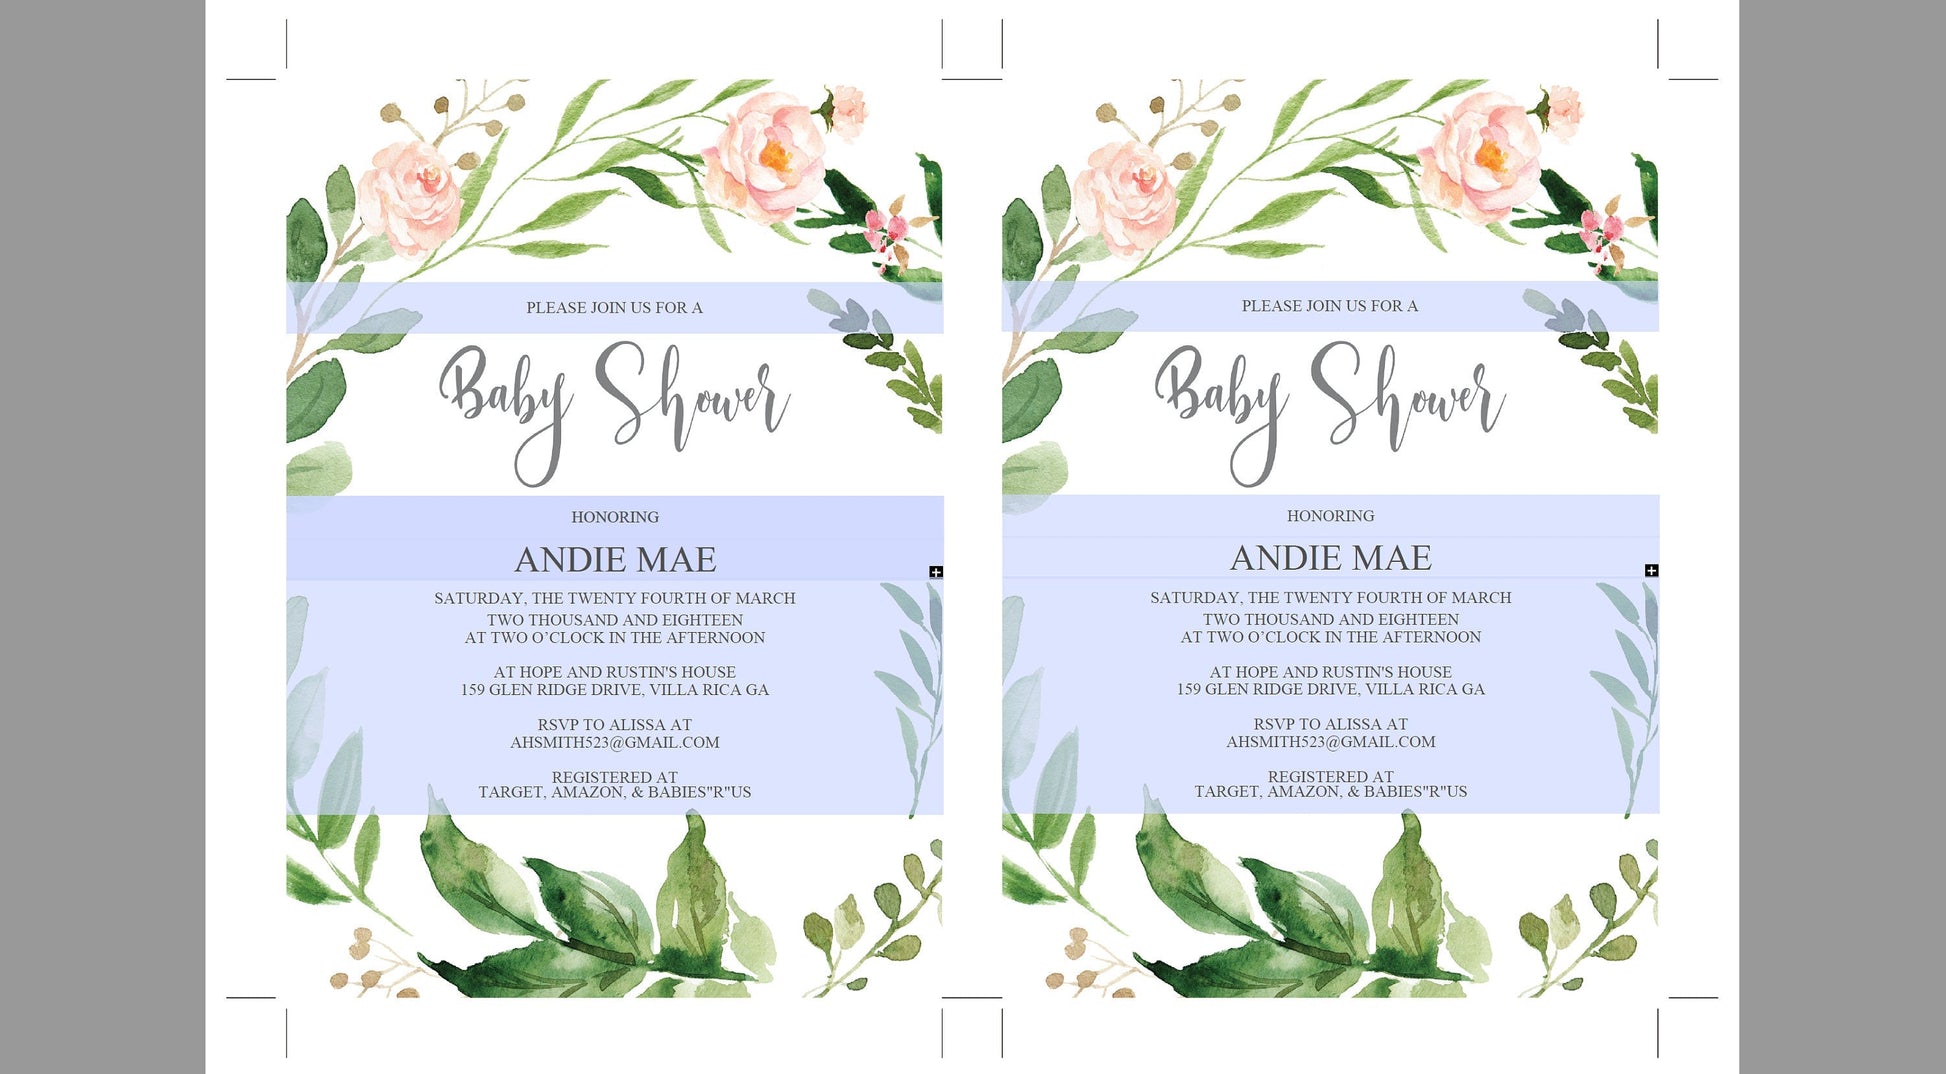 Printable Baby Shower Invitation Template, Floral, Greenery, Baby Shower invite, Gender Neutral, Invitation, Baby Shower Invites,Invite #WB2  SAVVY PAPER CO